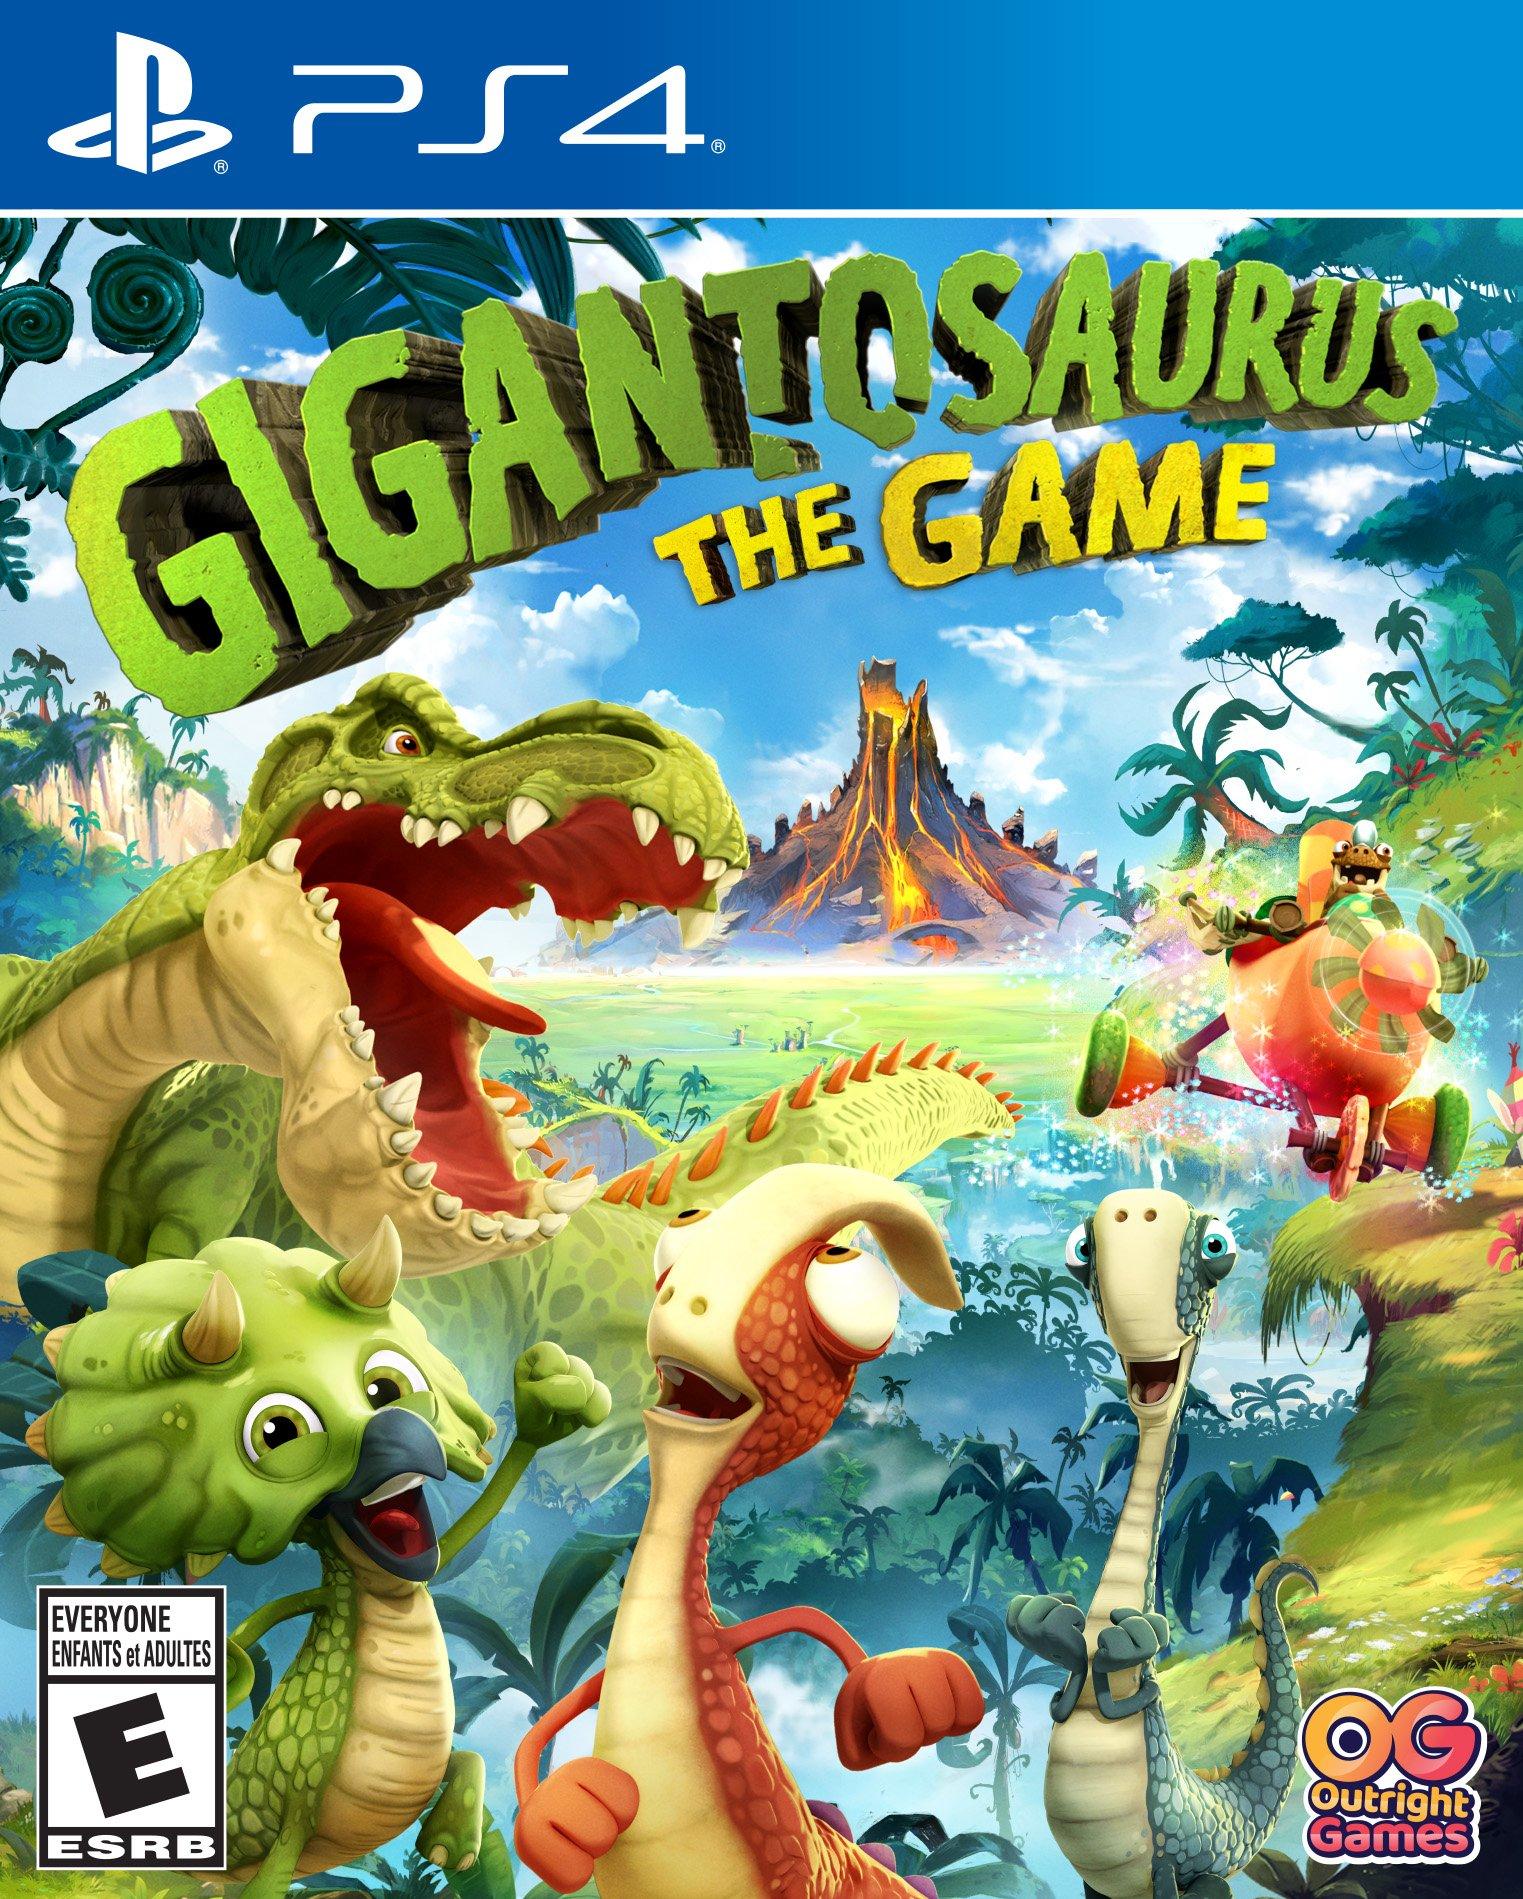 Gigantosaurus The Game | Outright Games | GameStop